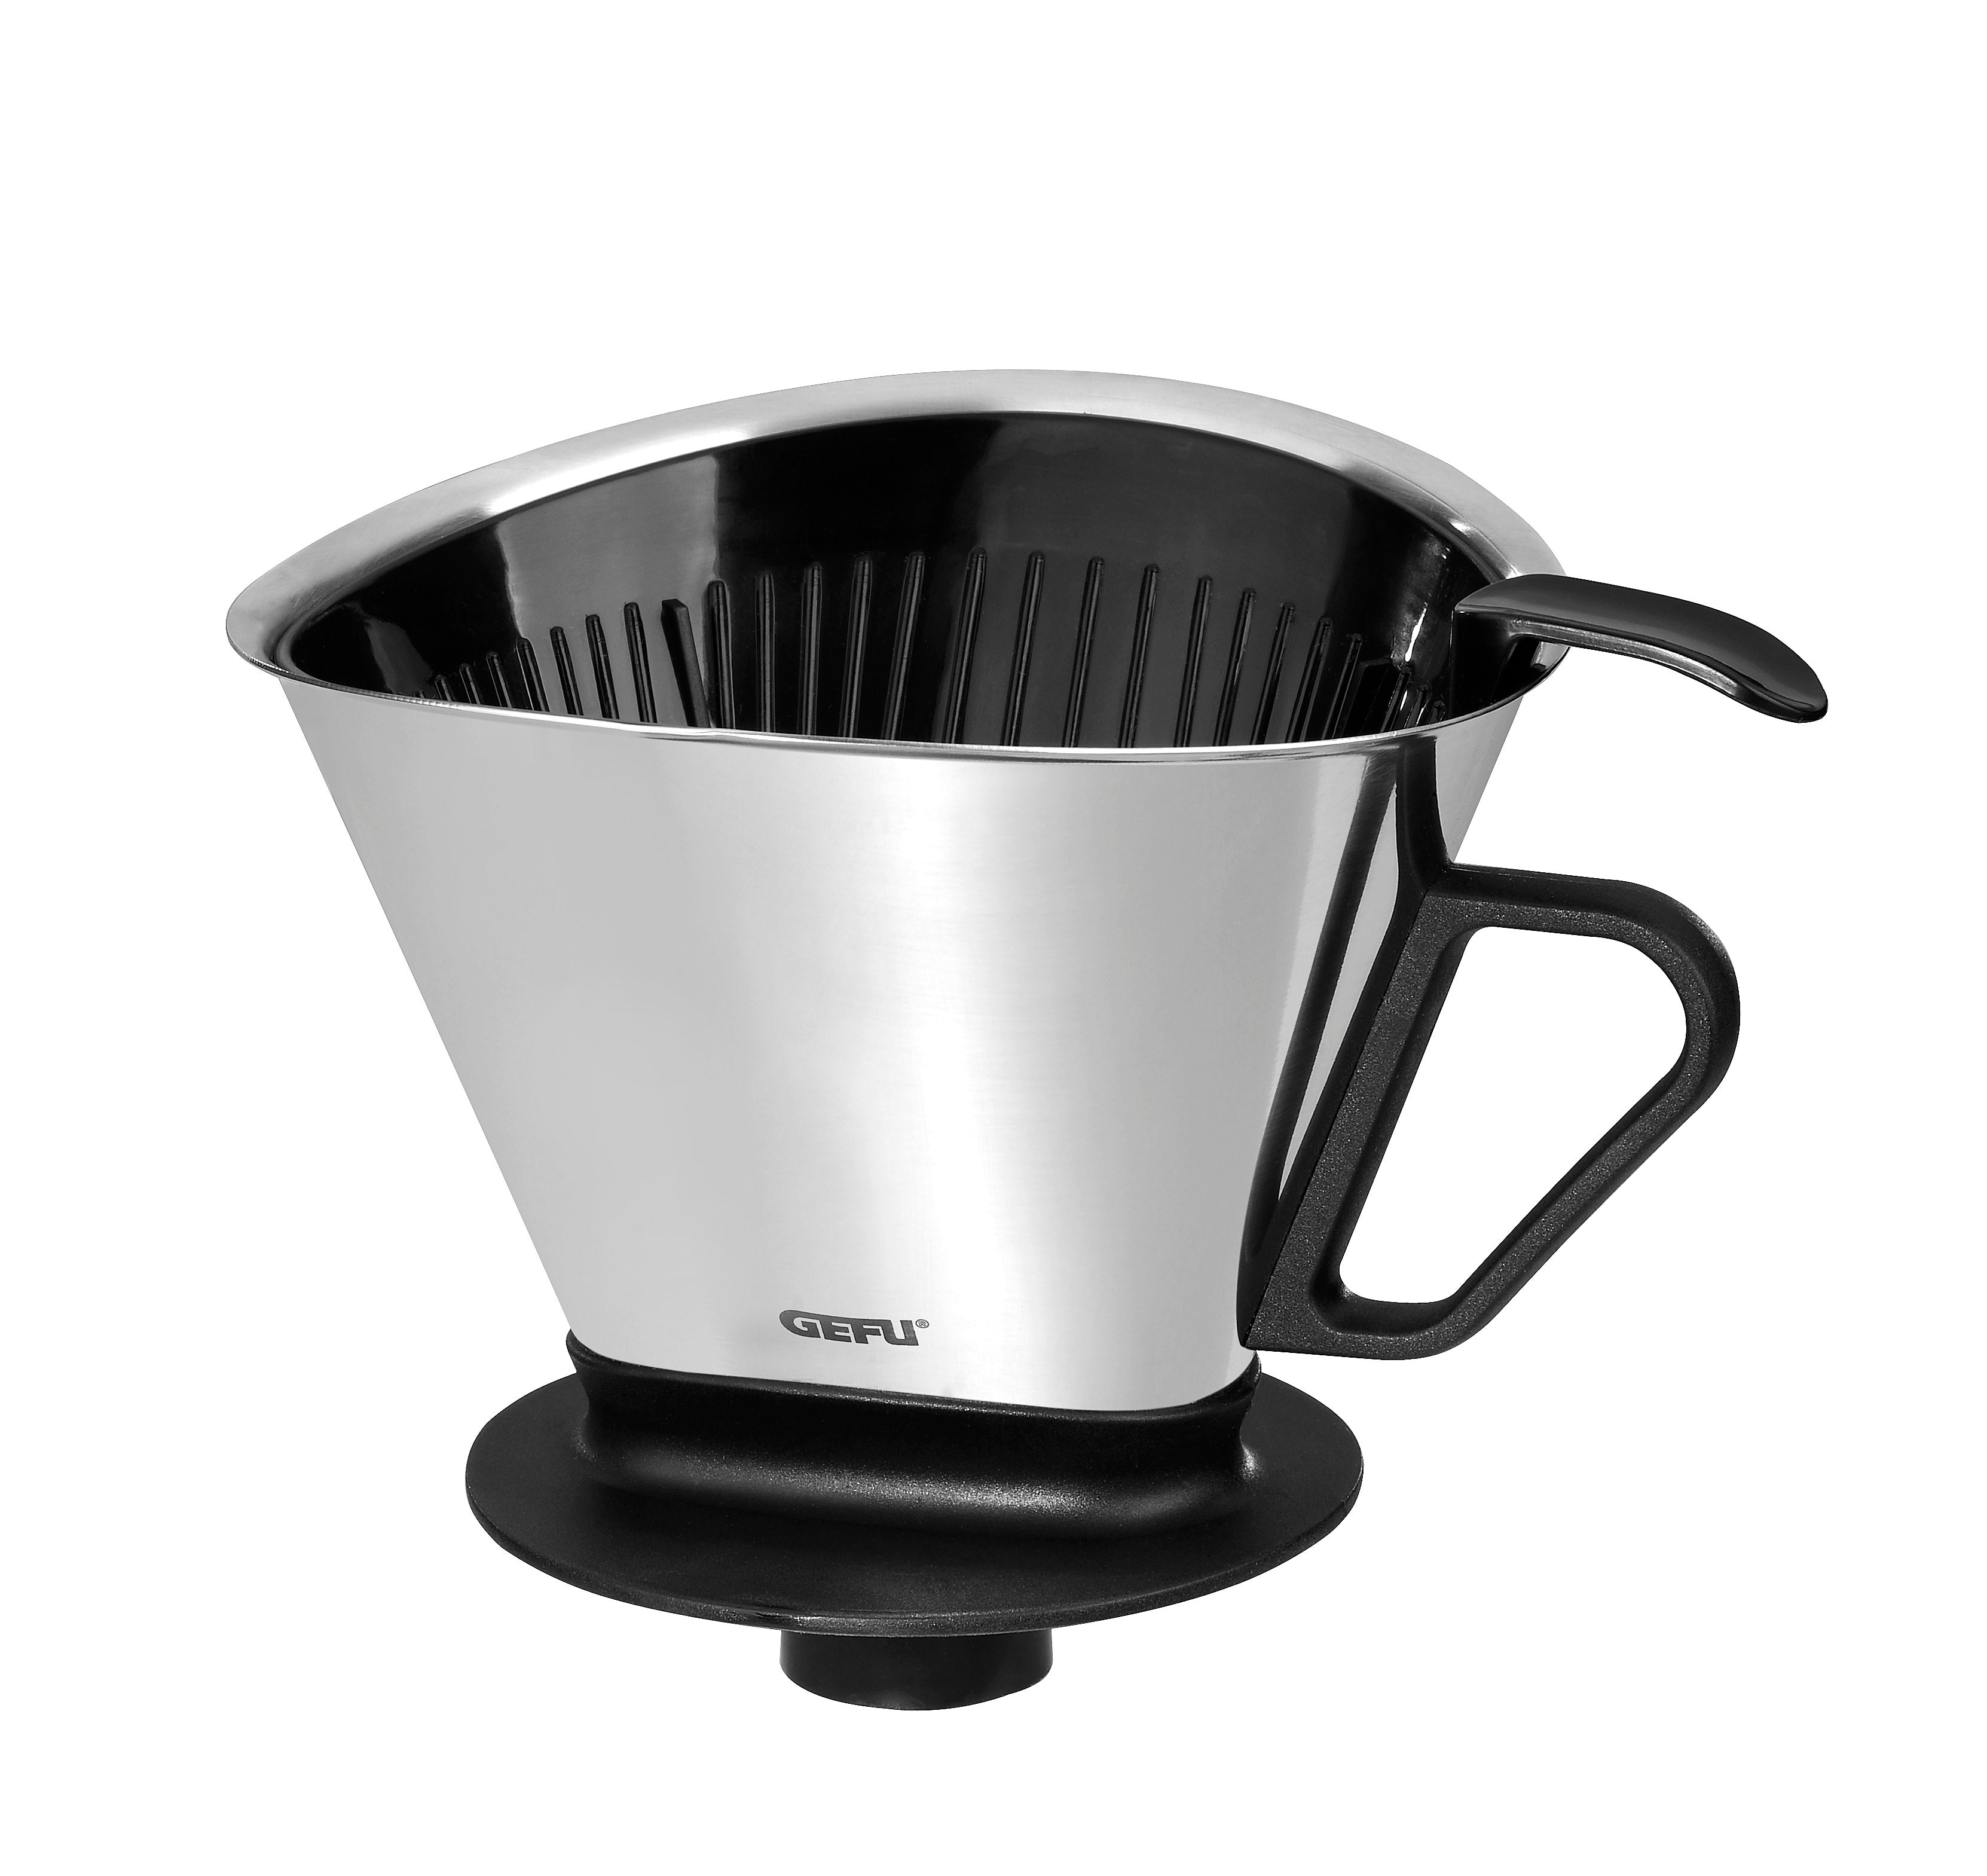 Coffee Filter, Size 4 - ANGELO 16000